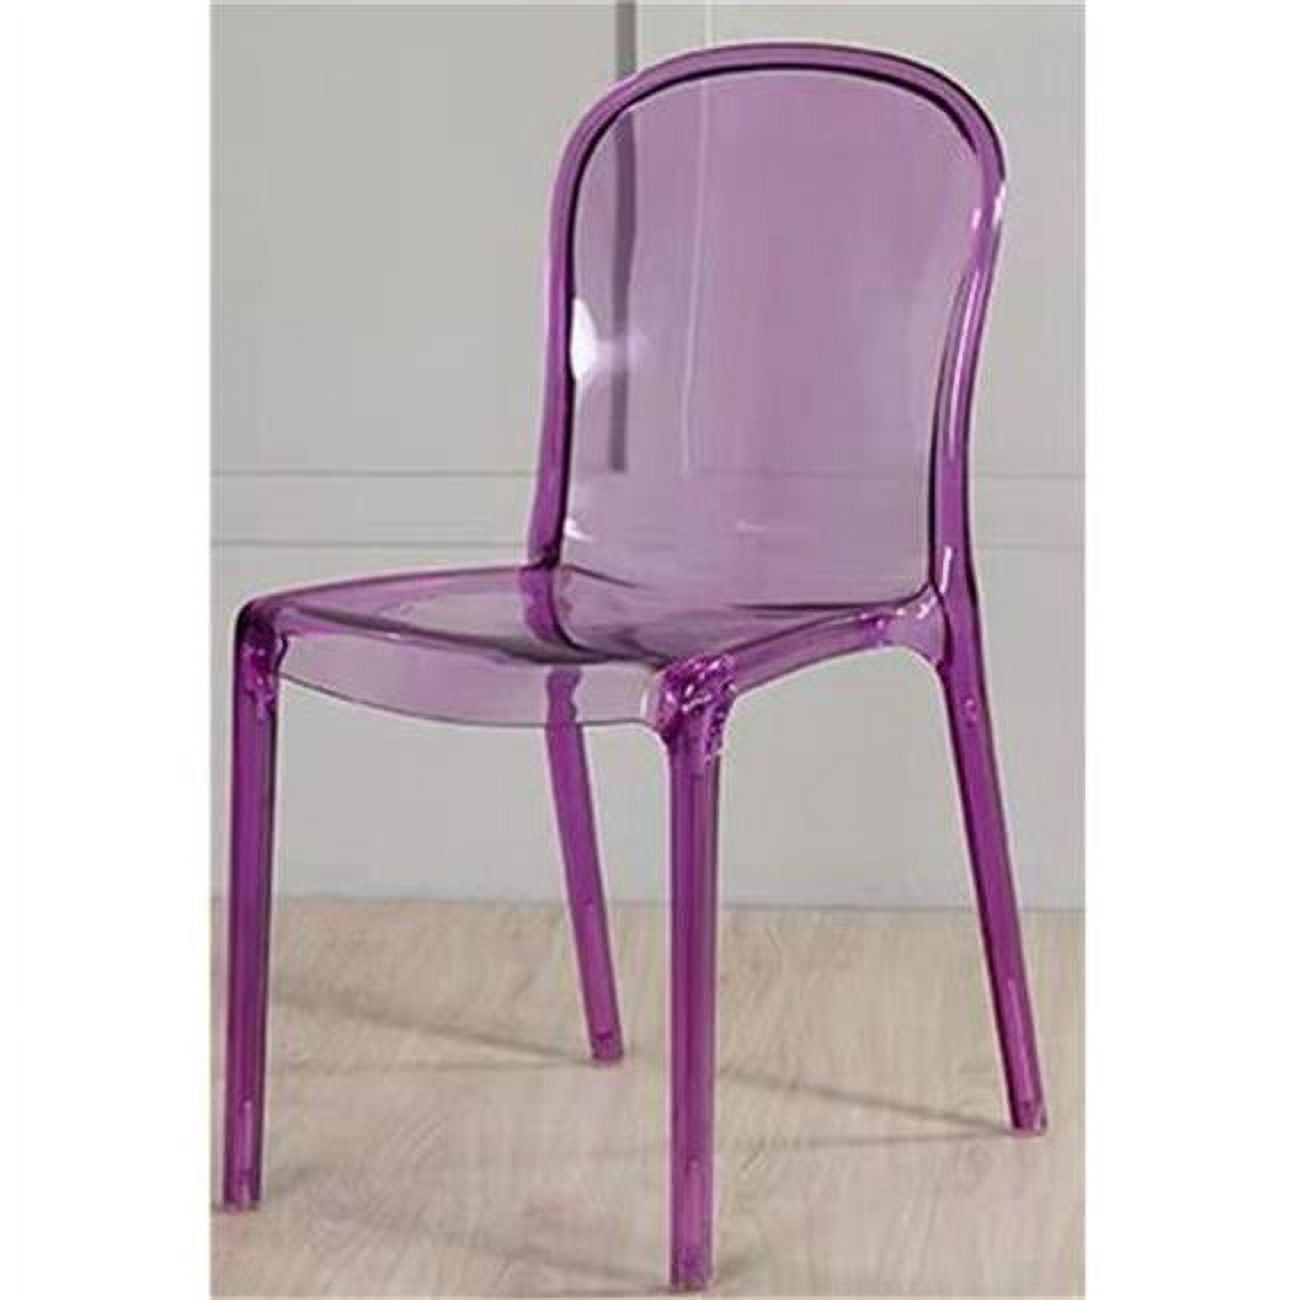 Rpc-genoa-pur-web4 Genoa Polycarbonate Stackable Purple Chair, Set Of 4 - 33 X 16.5 X 21 In.